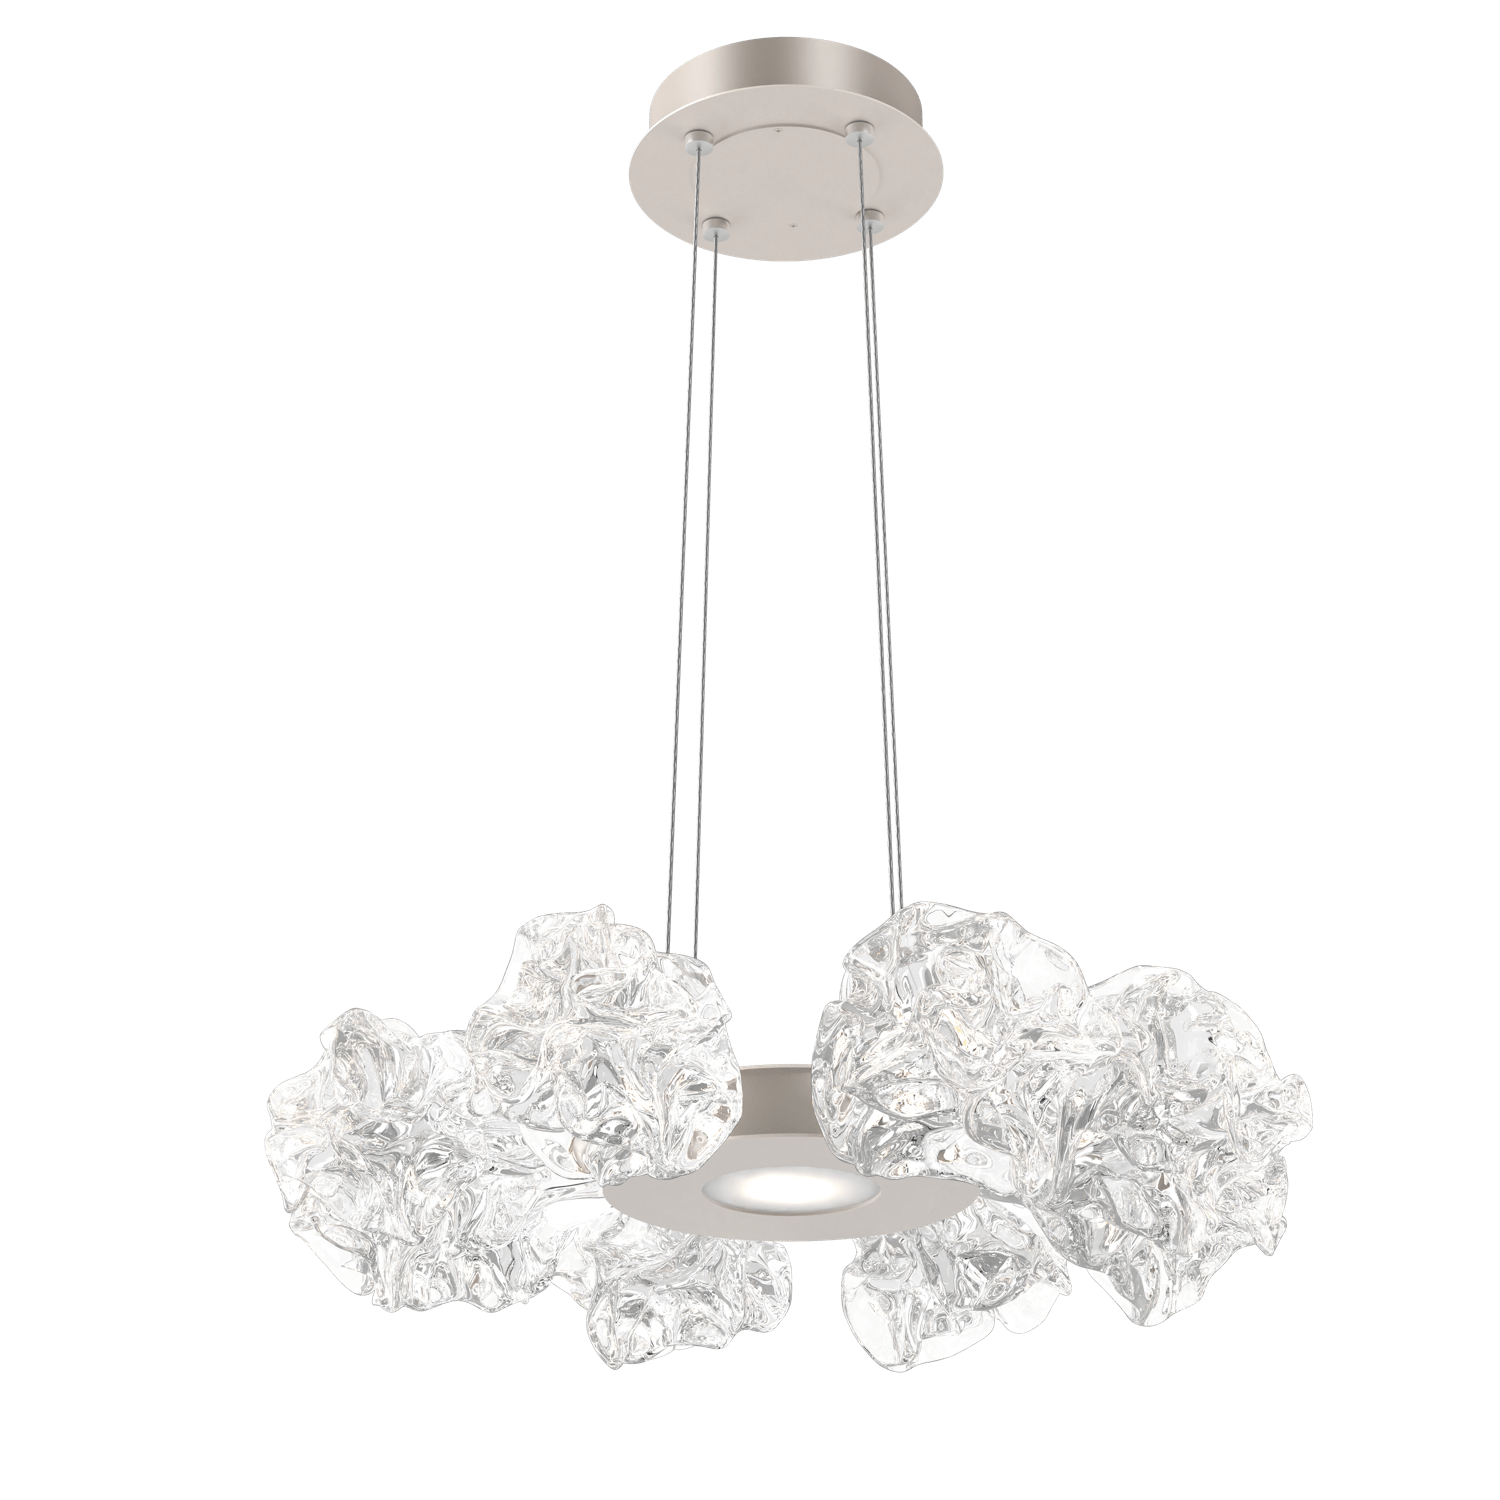 CHB0059-24-BS-Hammerton-Studio-Blossom-24-inch-radial-ring-chandelier-with-metallic-beige-silver-finish-and-clear-handblown-crystal-glass-shades-and-LED-lamping